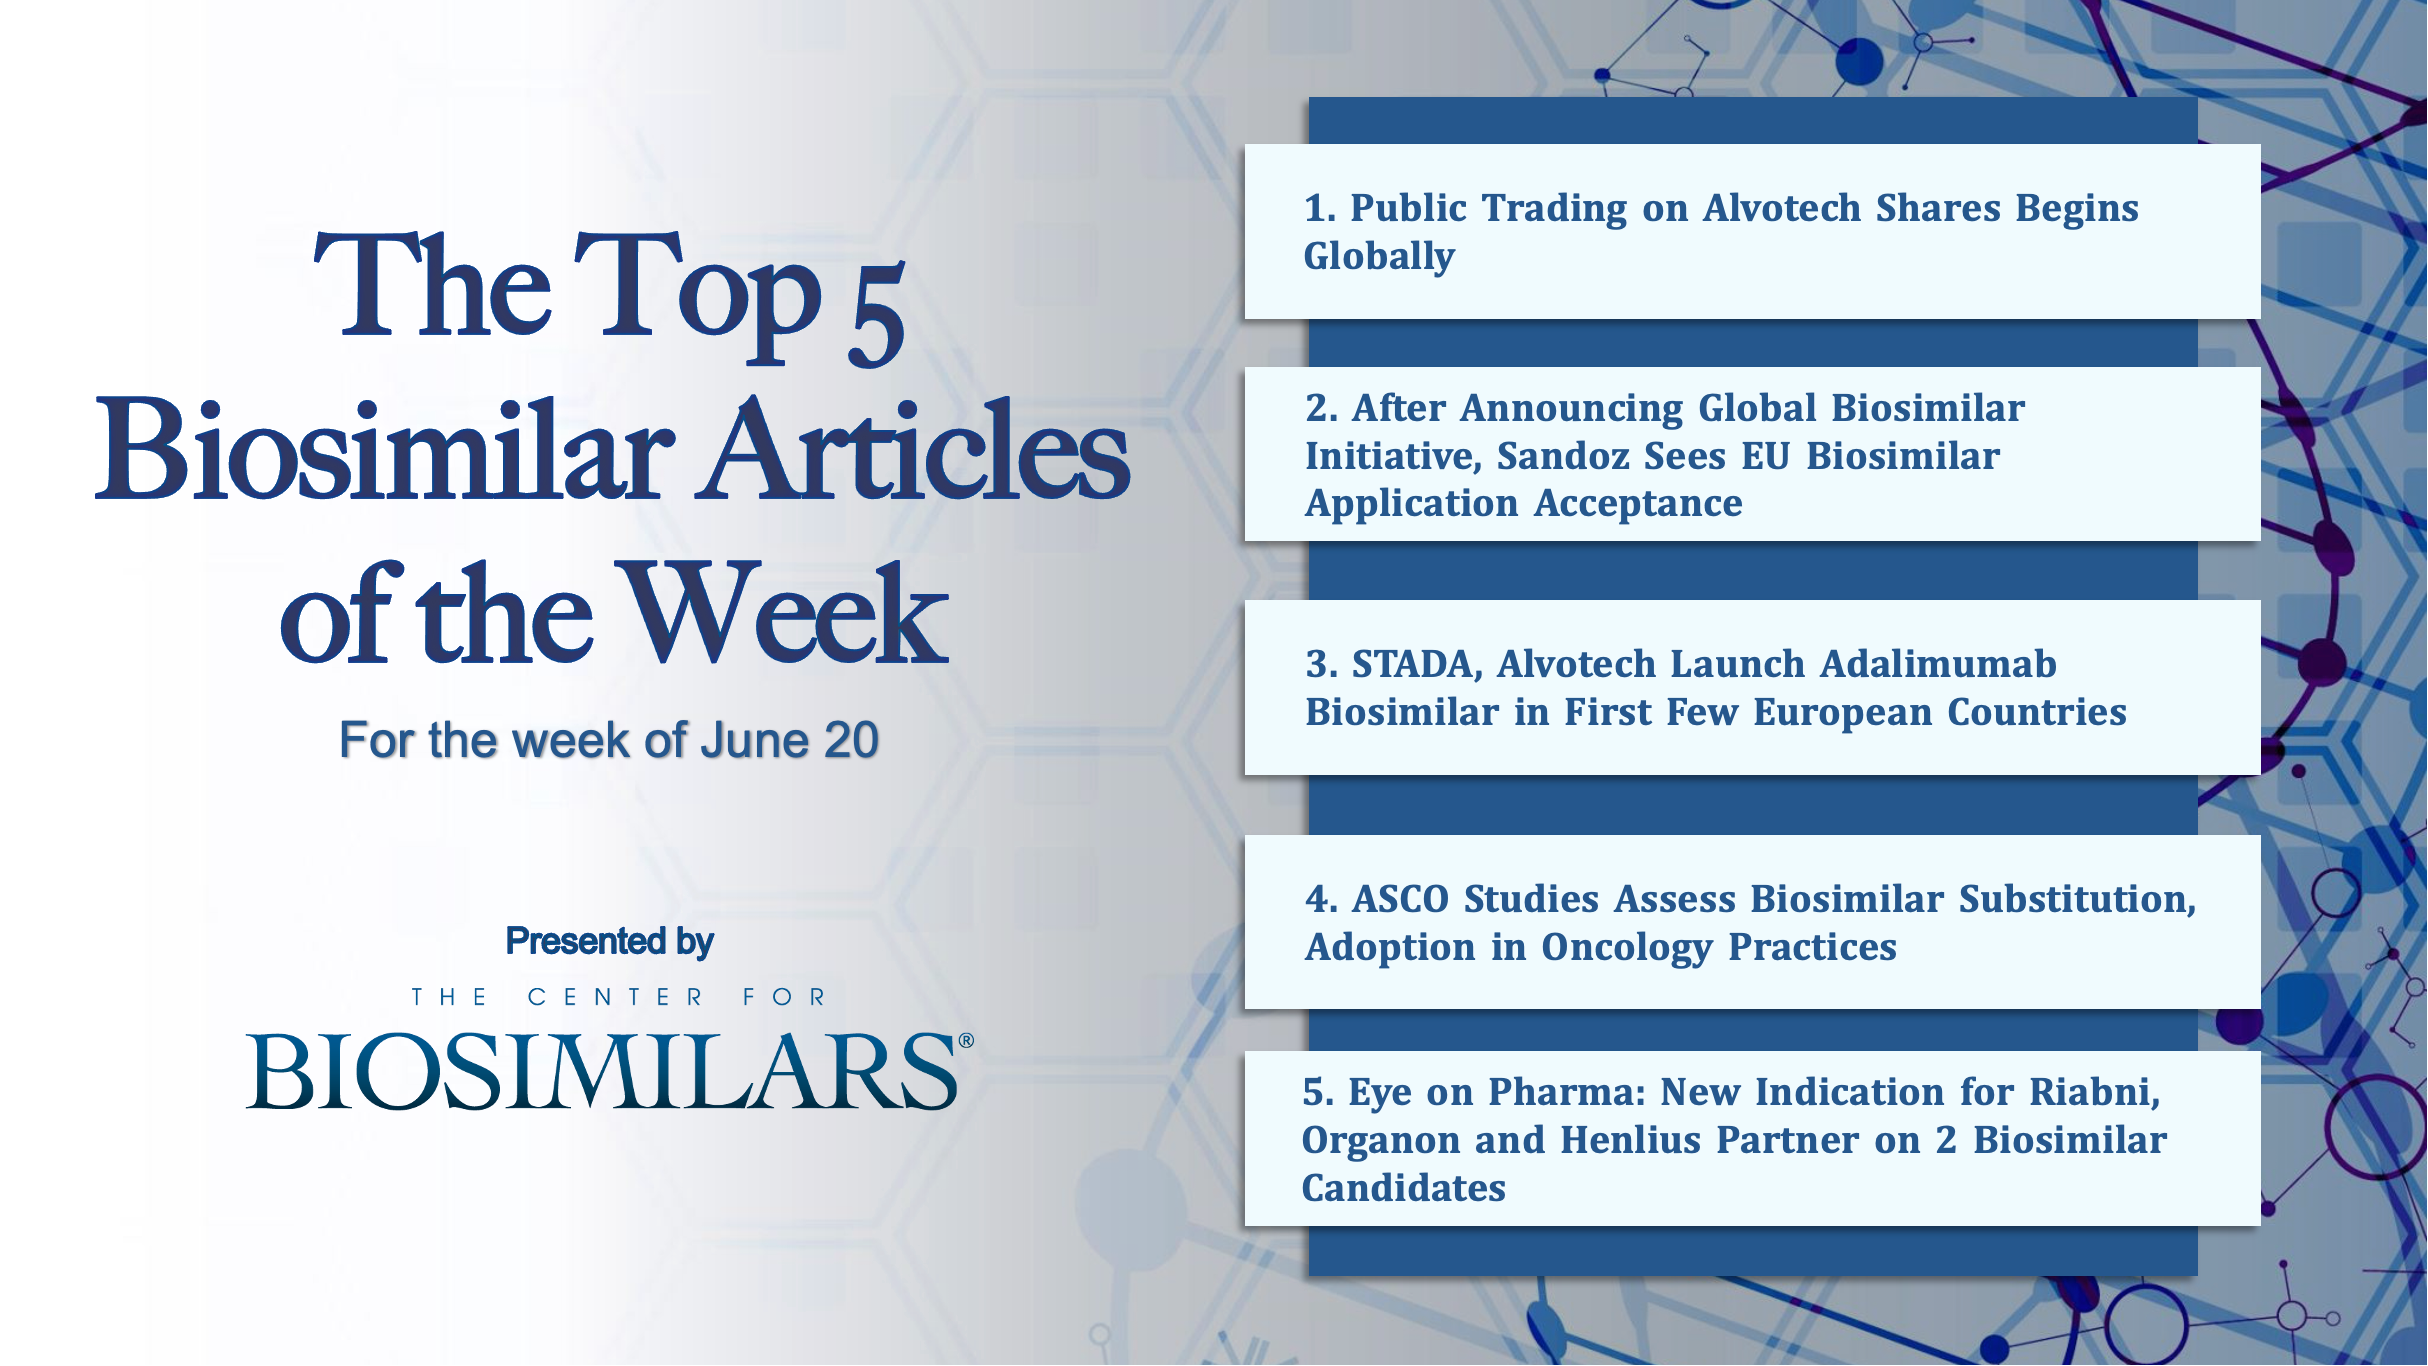 Here are the top 5 biosimilar articles for the week of June 20, 2022.